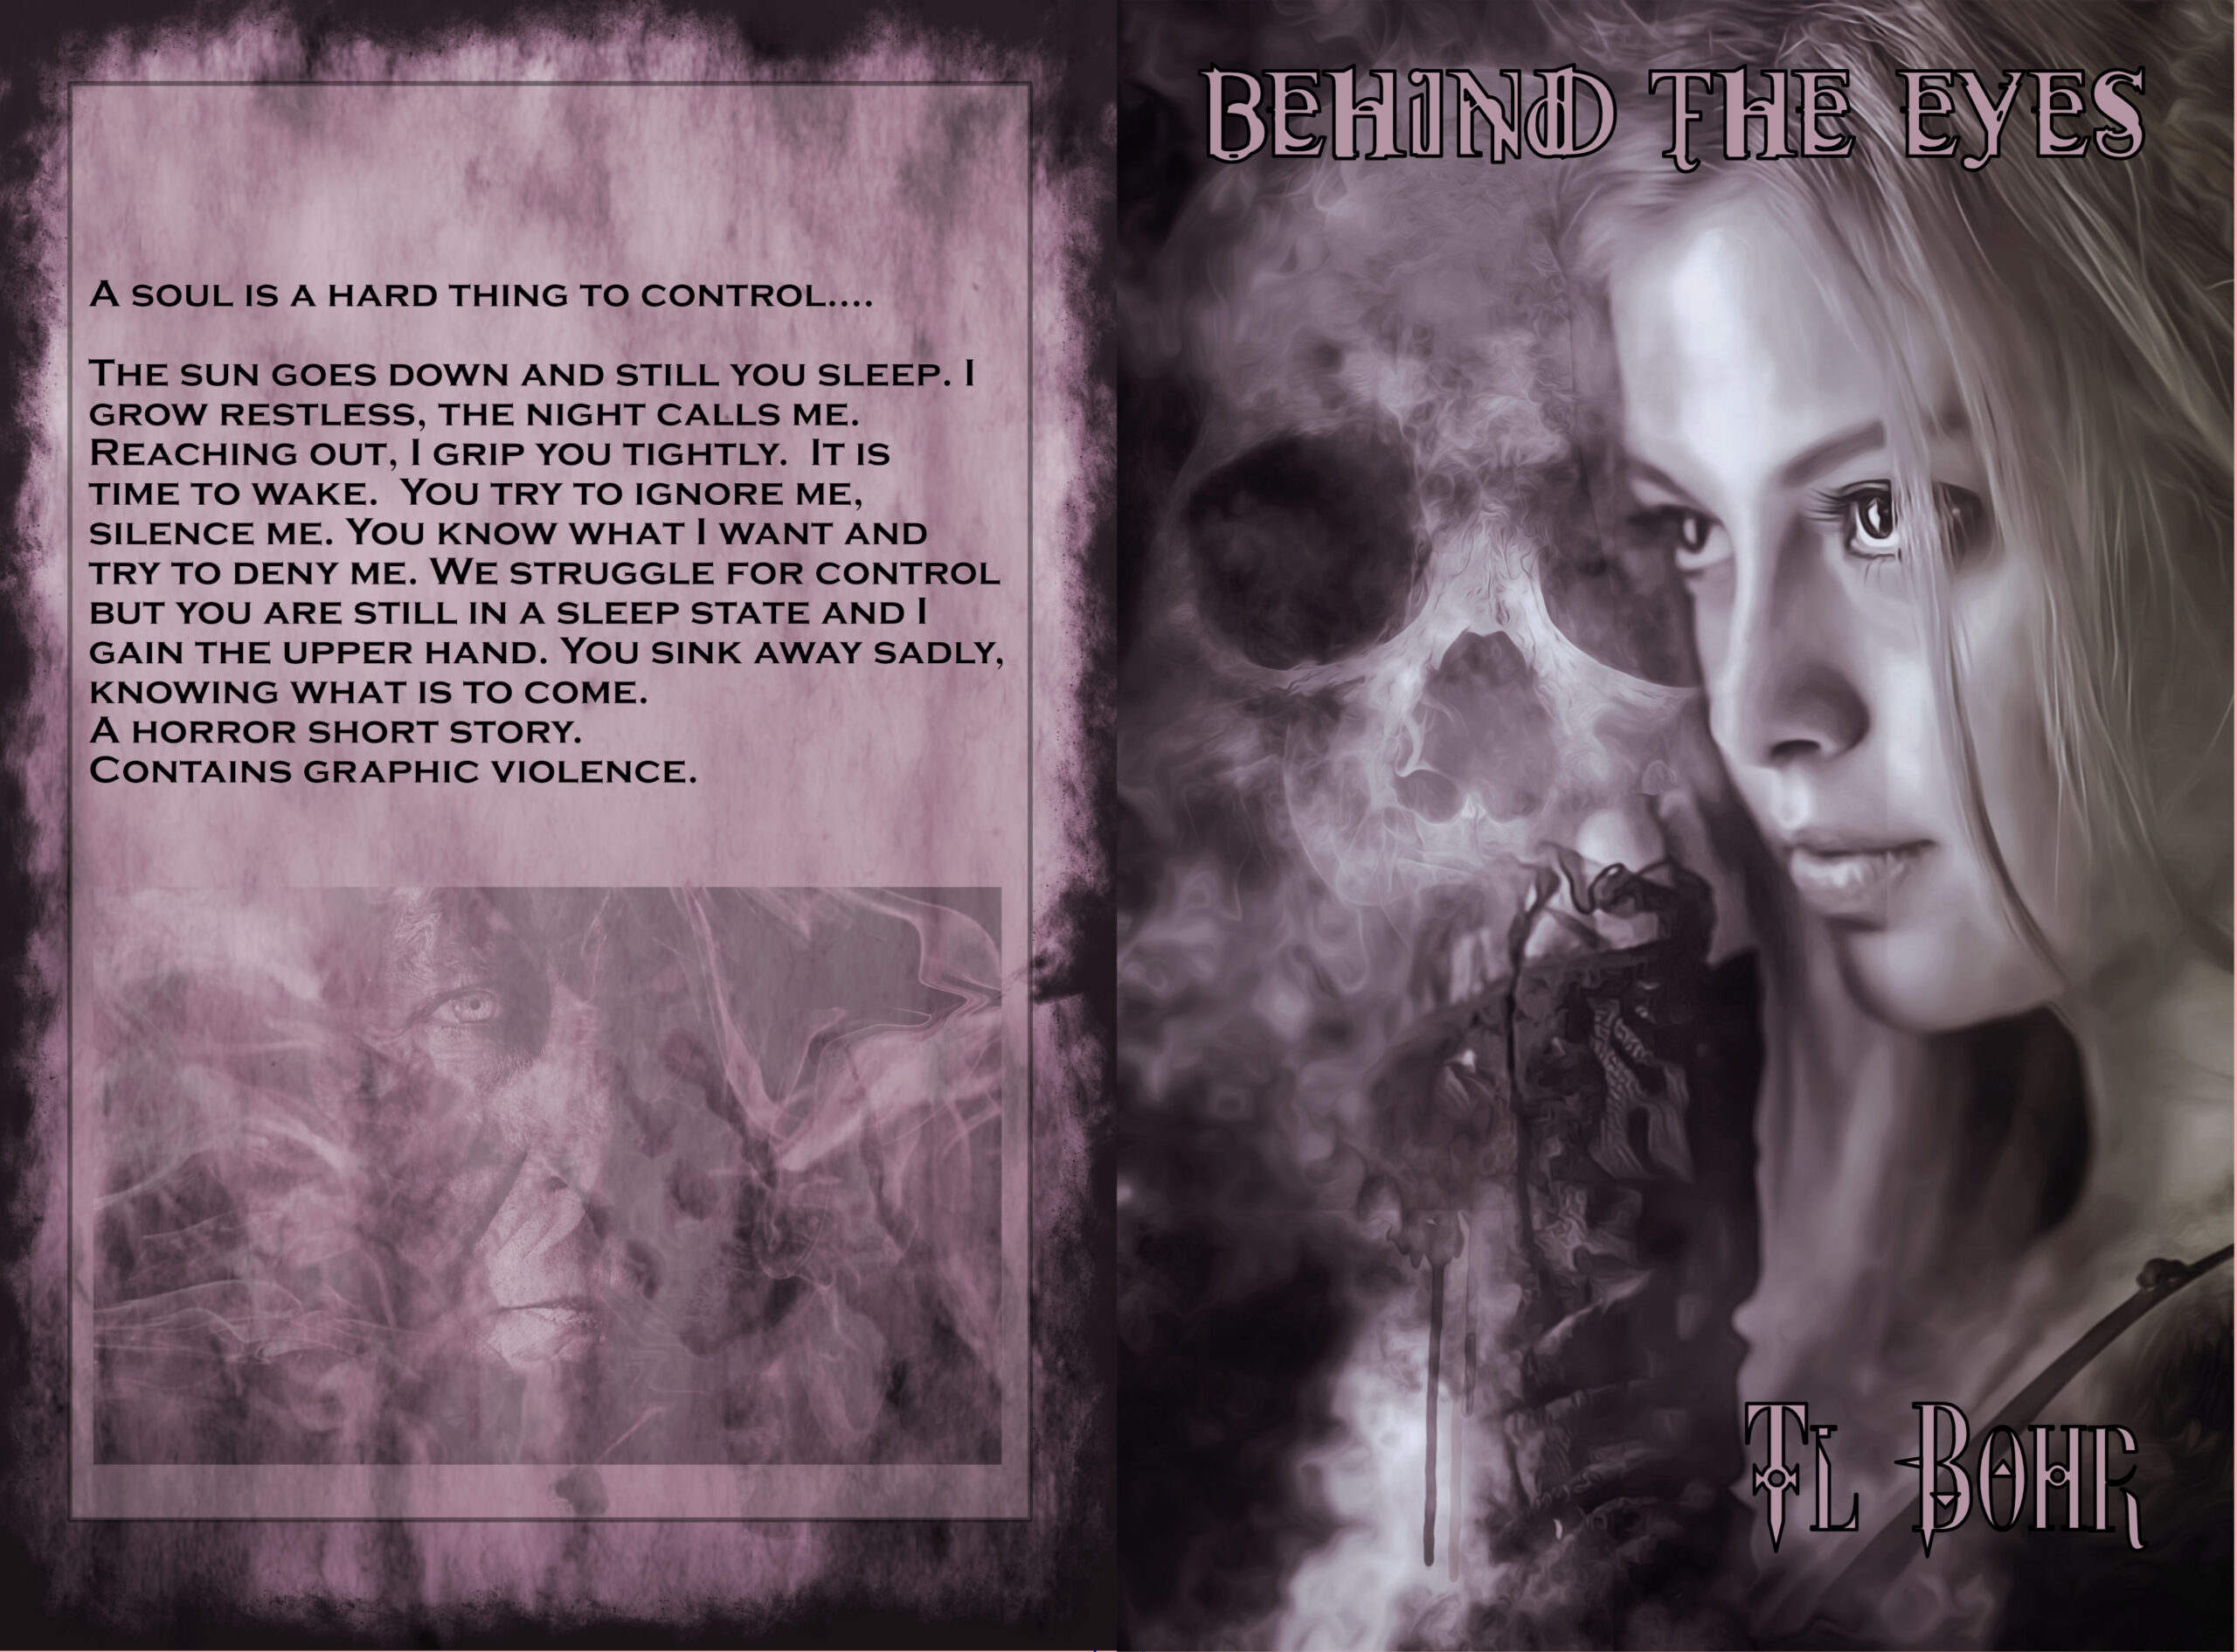 Behind the Eyes Jacket Cover